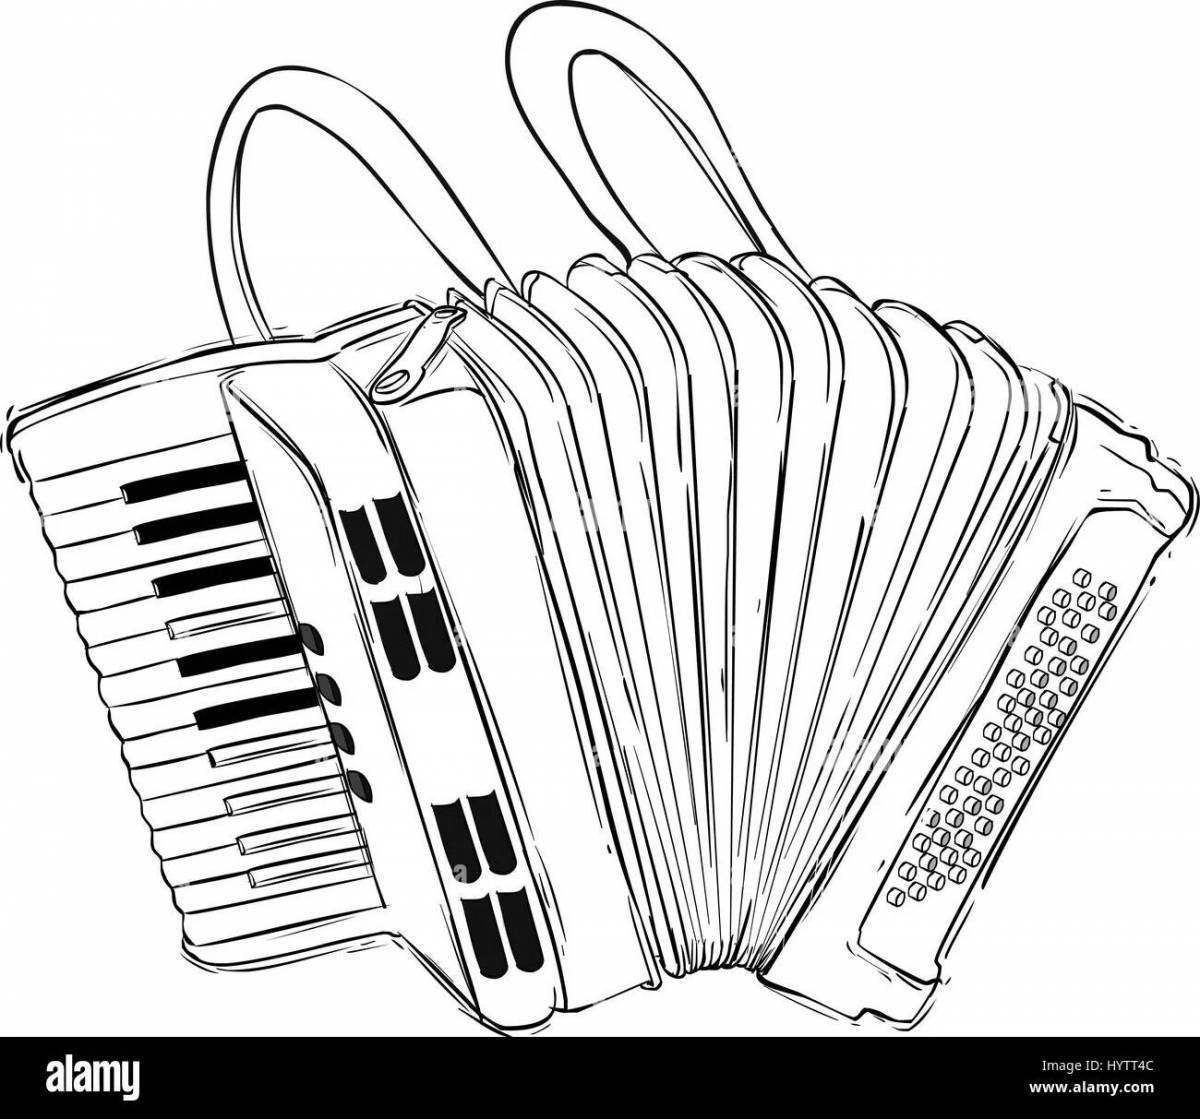 Elegant baby accordion musical instruments with labels